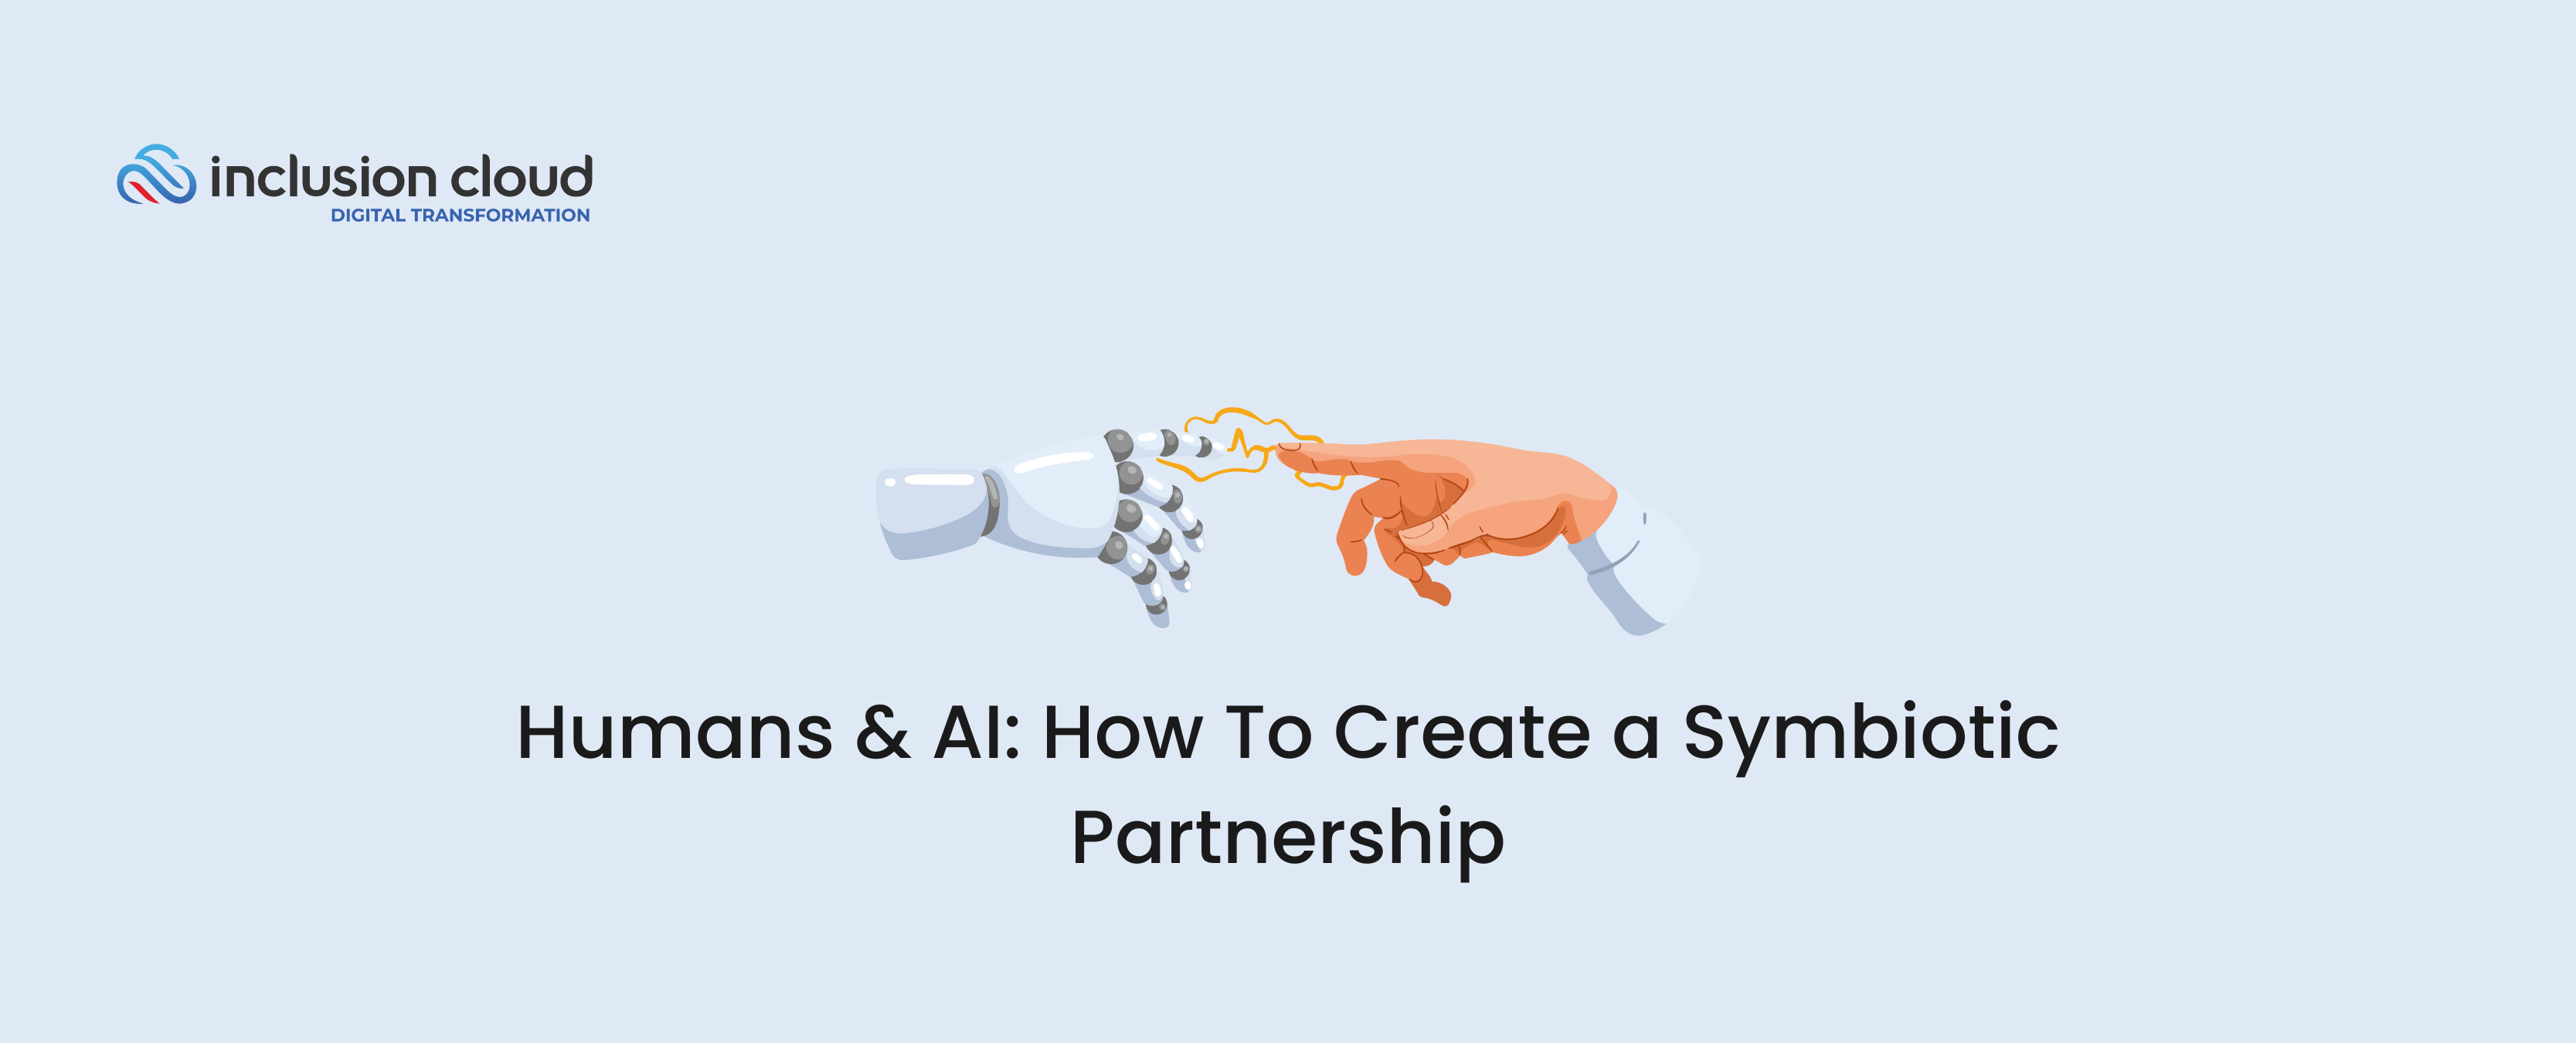 Humans & AI How To Create a Symbiotic Partnership